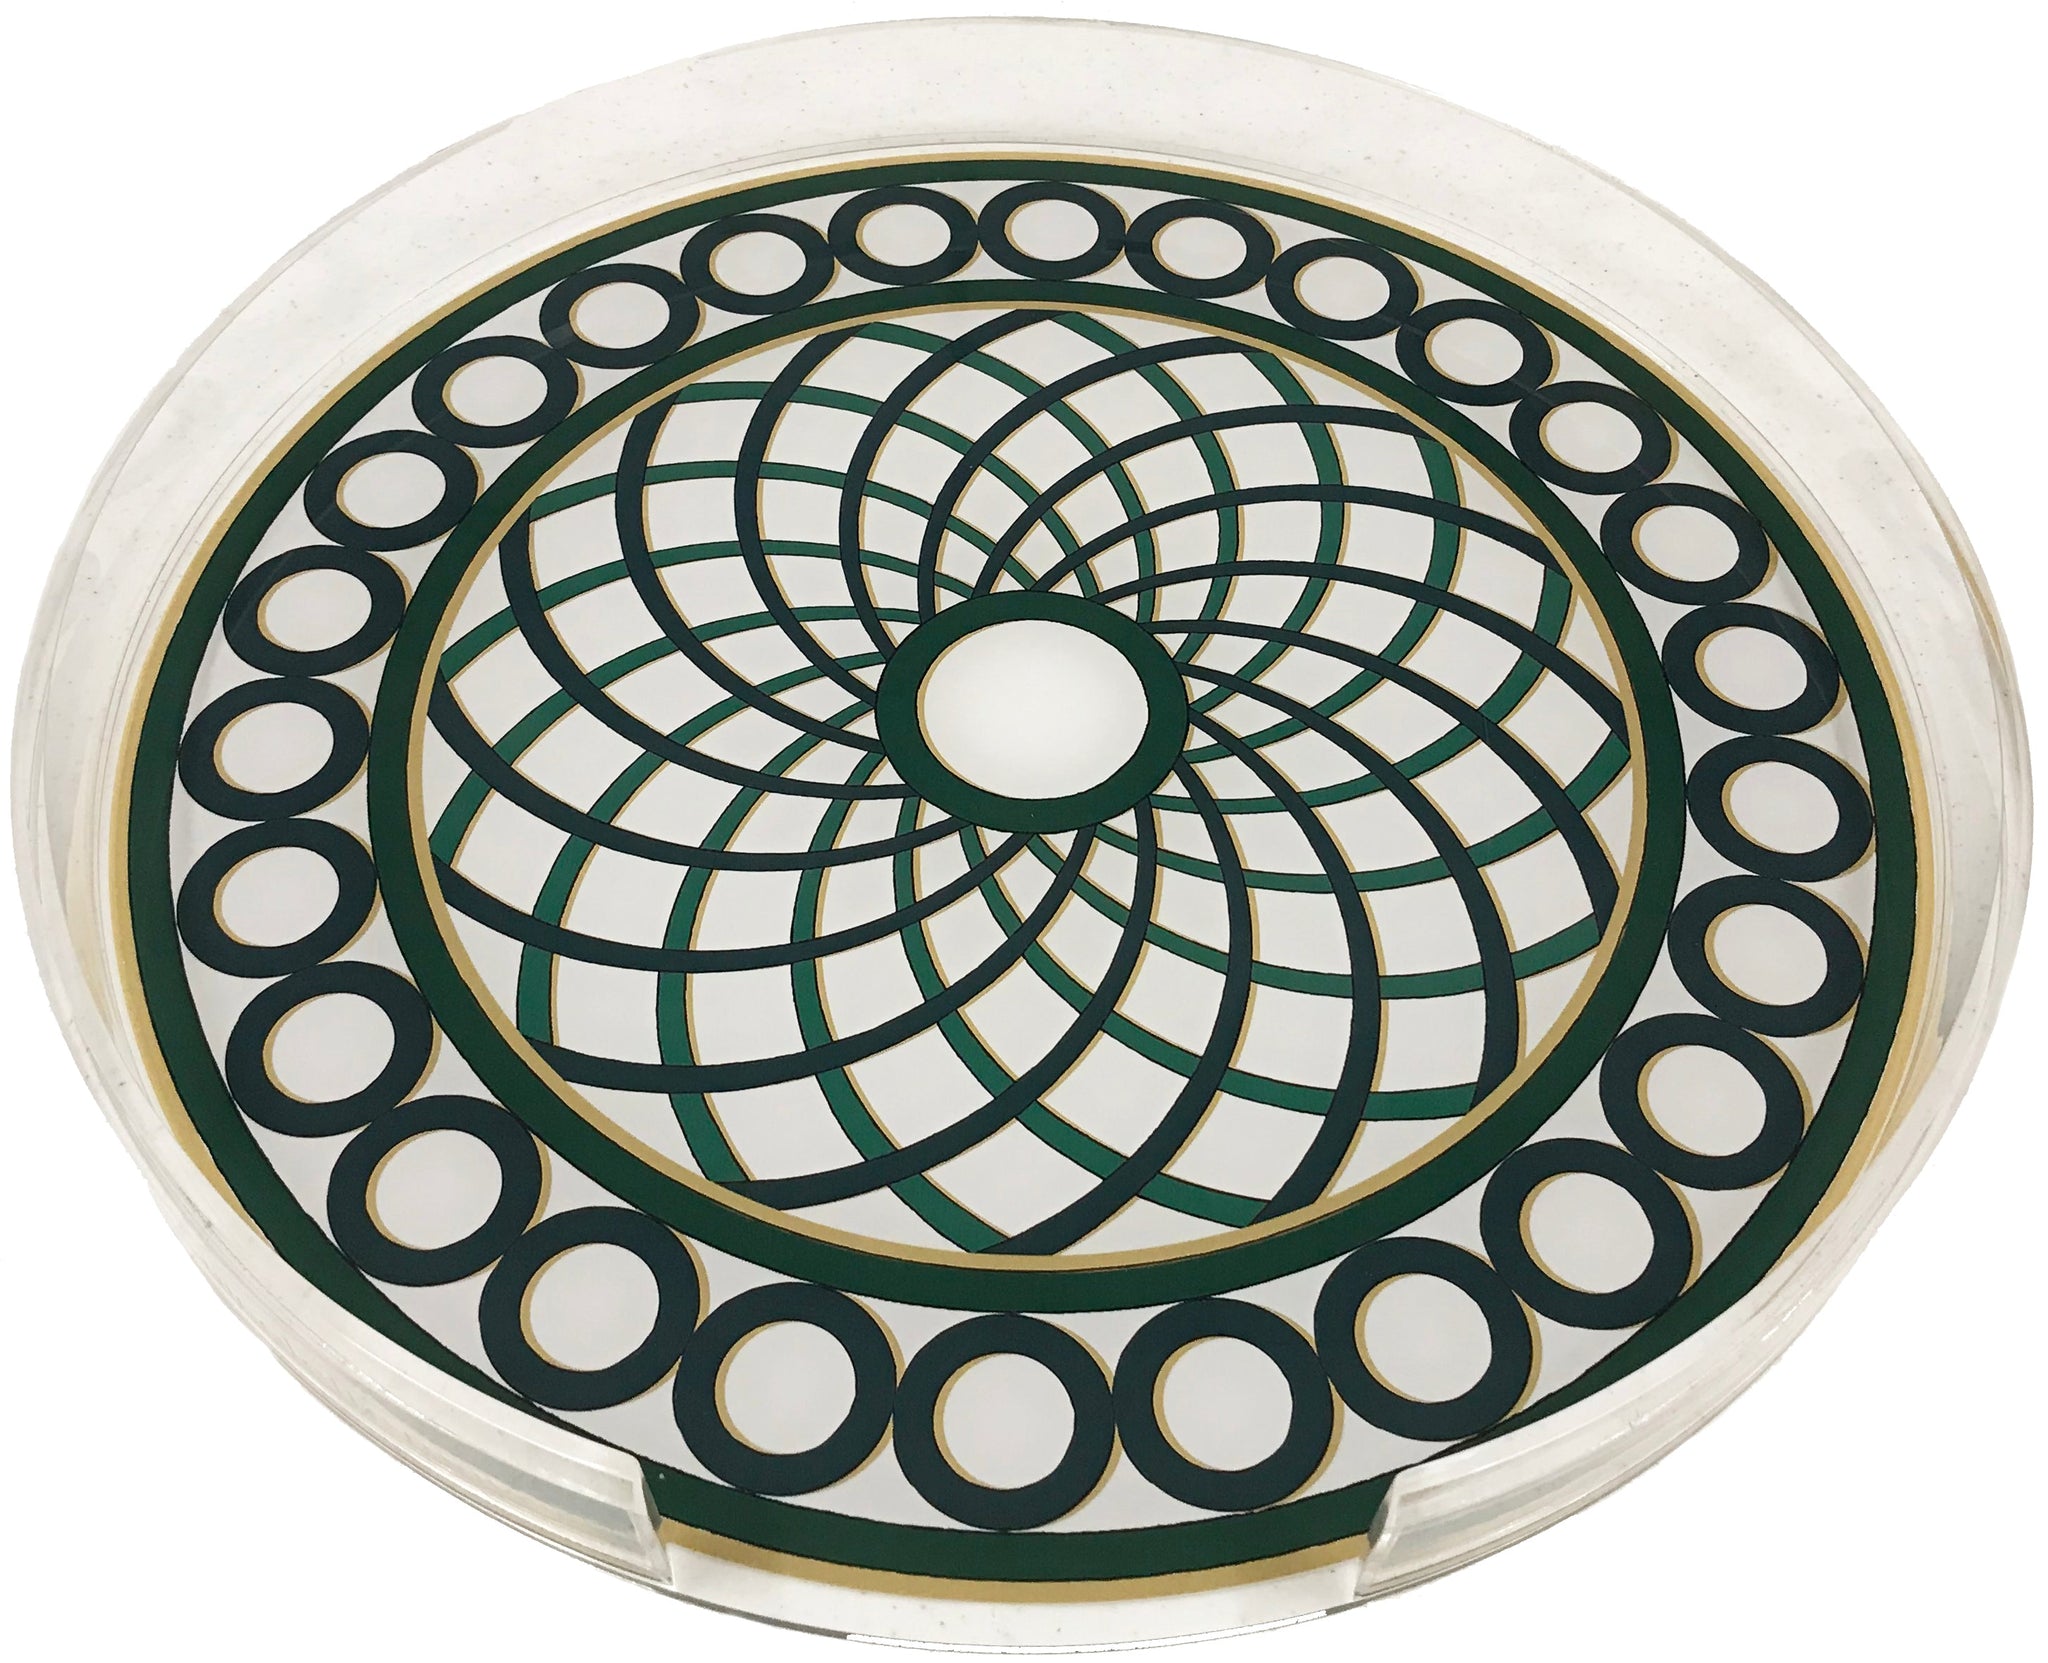 Timothy Corrigan Treillage Green Acrylic Round Tray for Placemats or Decorative Use, 16"